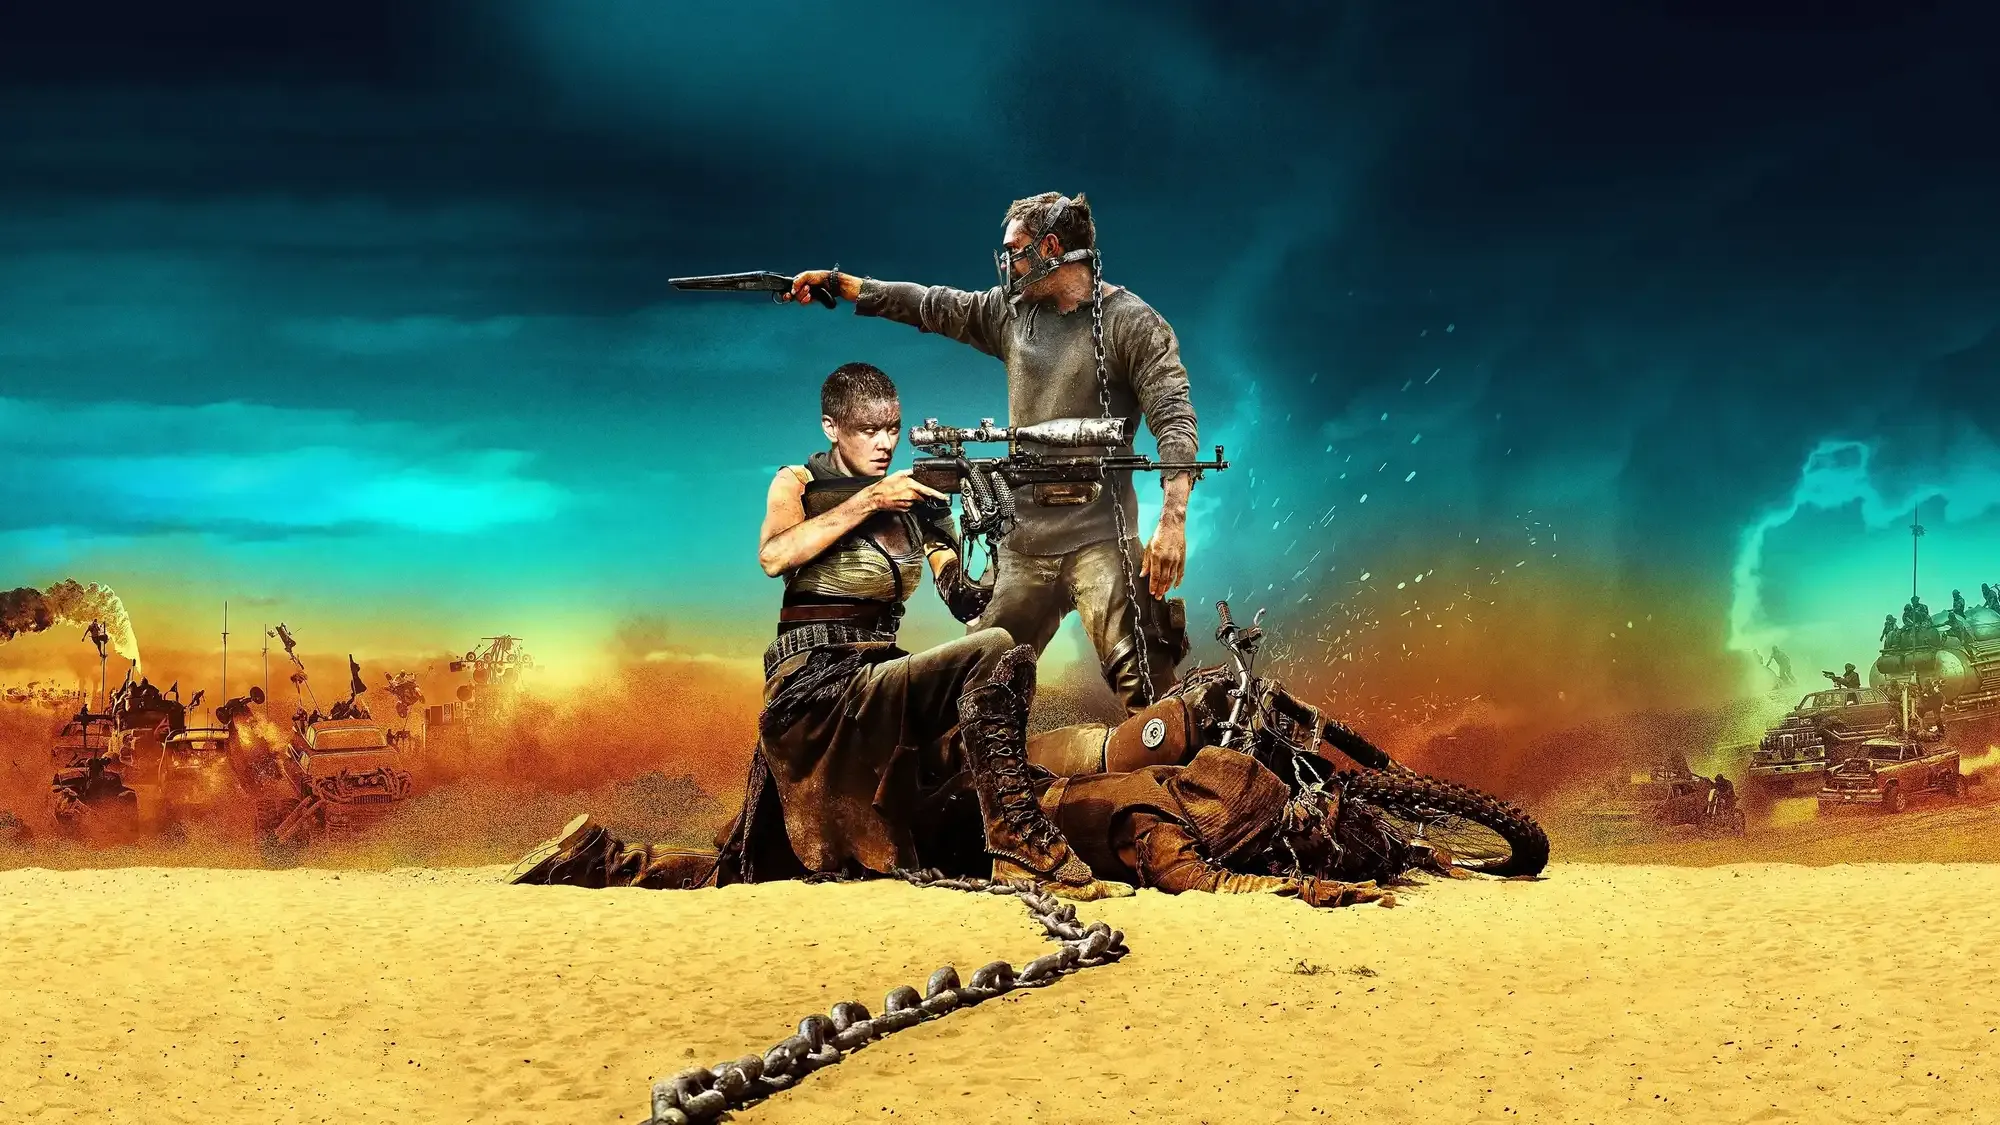 Mad Max: Fury Road movie review